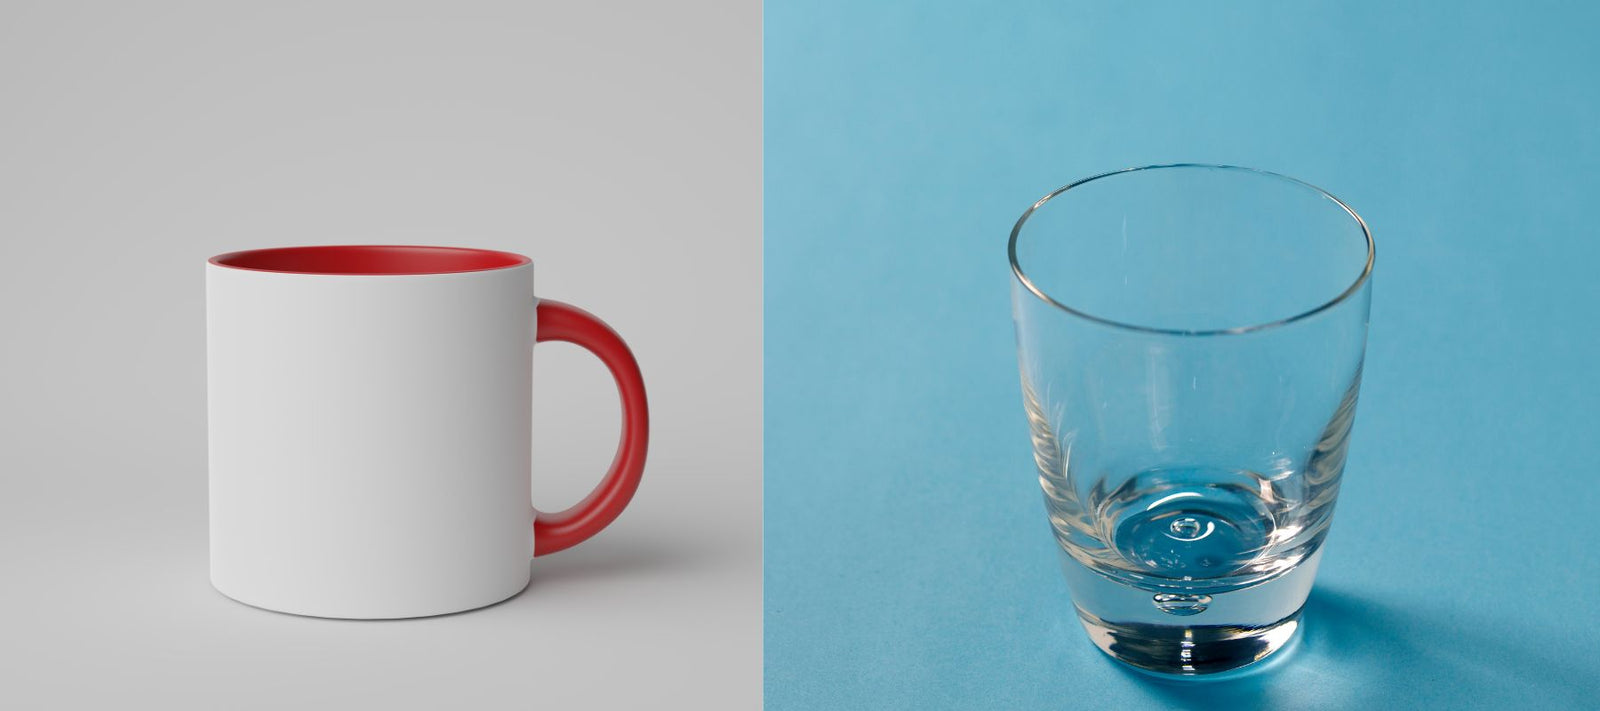 Espresso Cups: A Guide to the Best Types of Coffee Mugs and Glasses